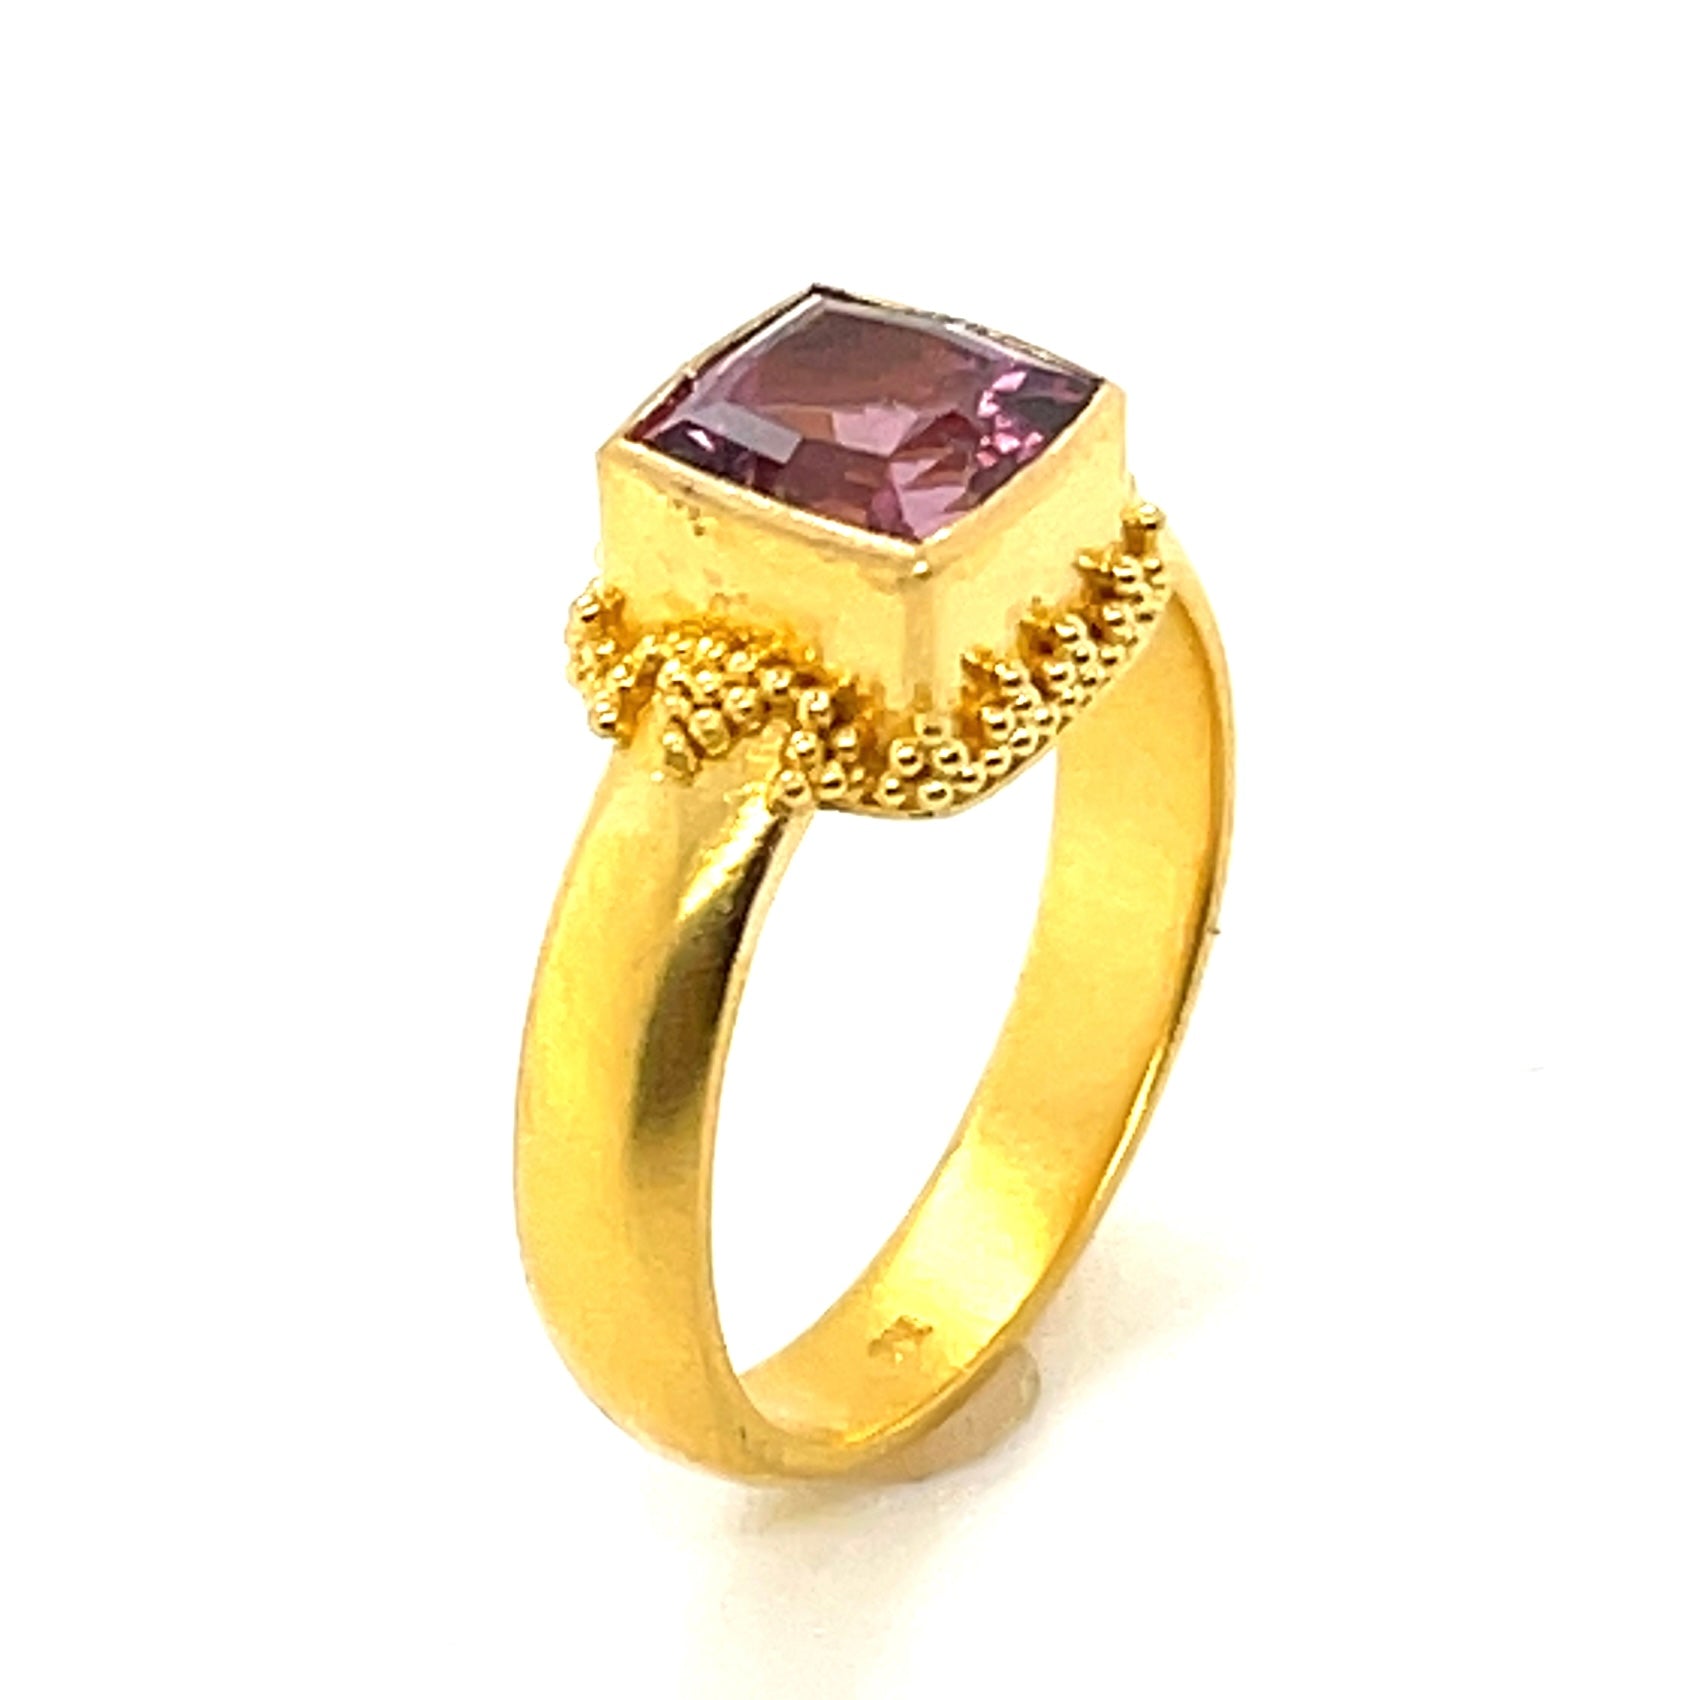 Cushion cut Pink Spinel Ring